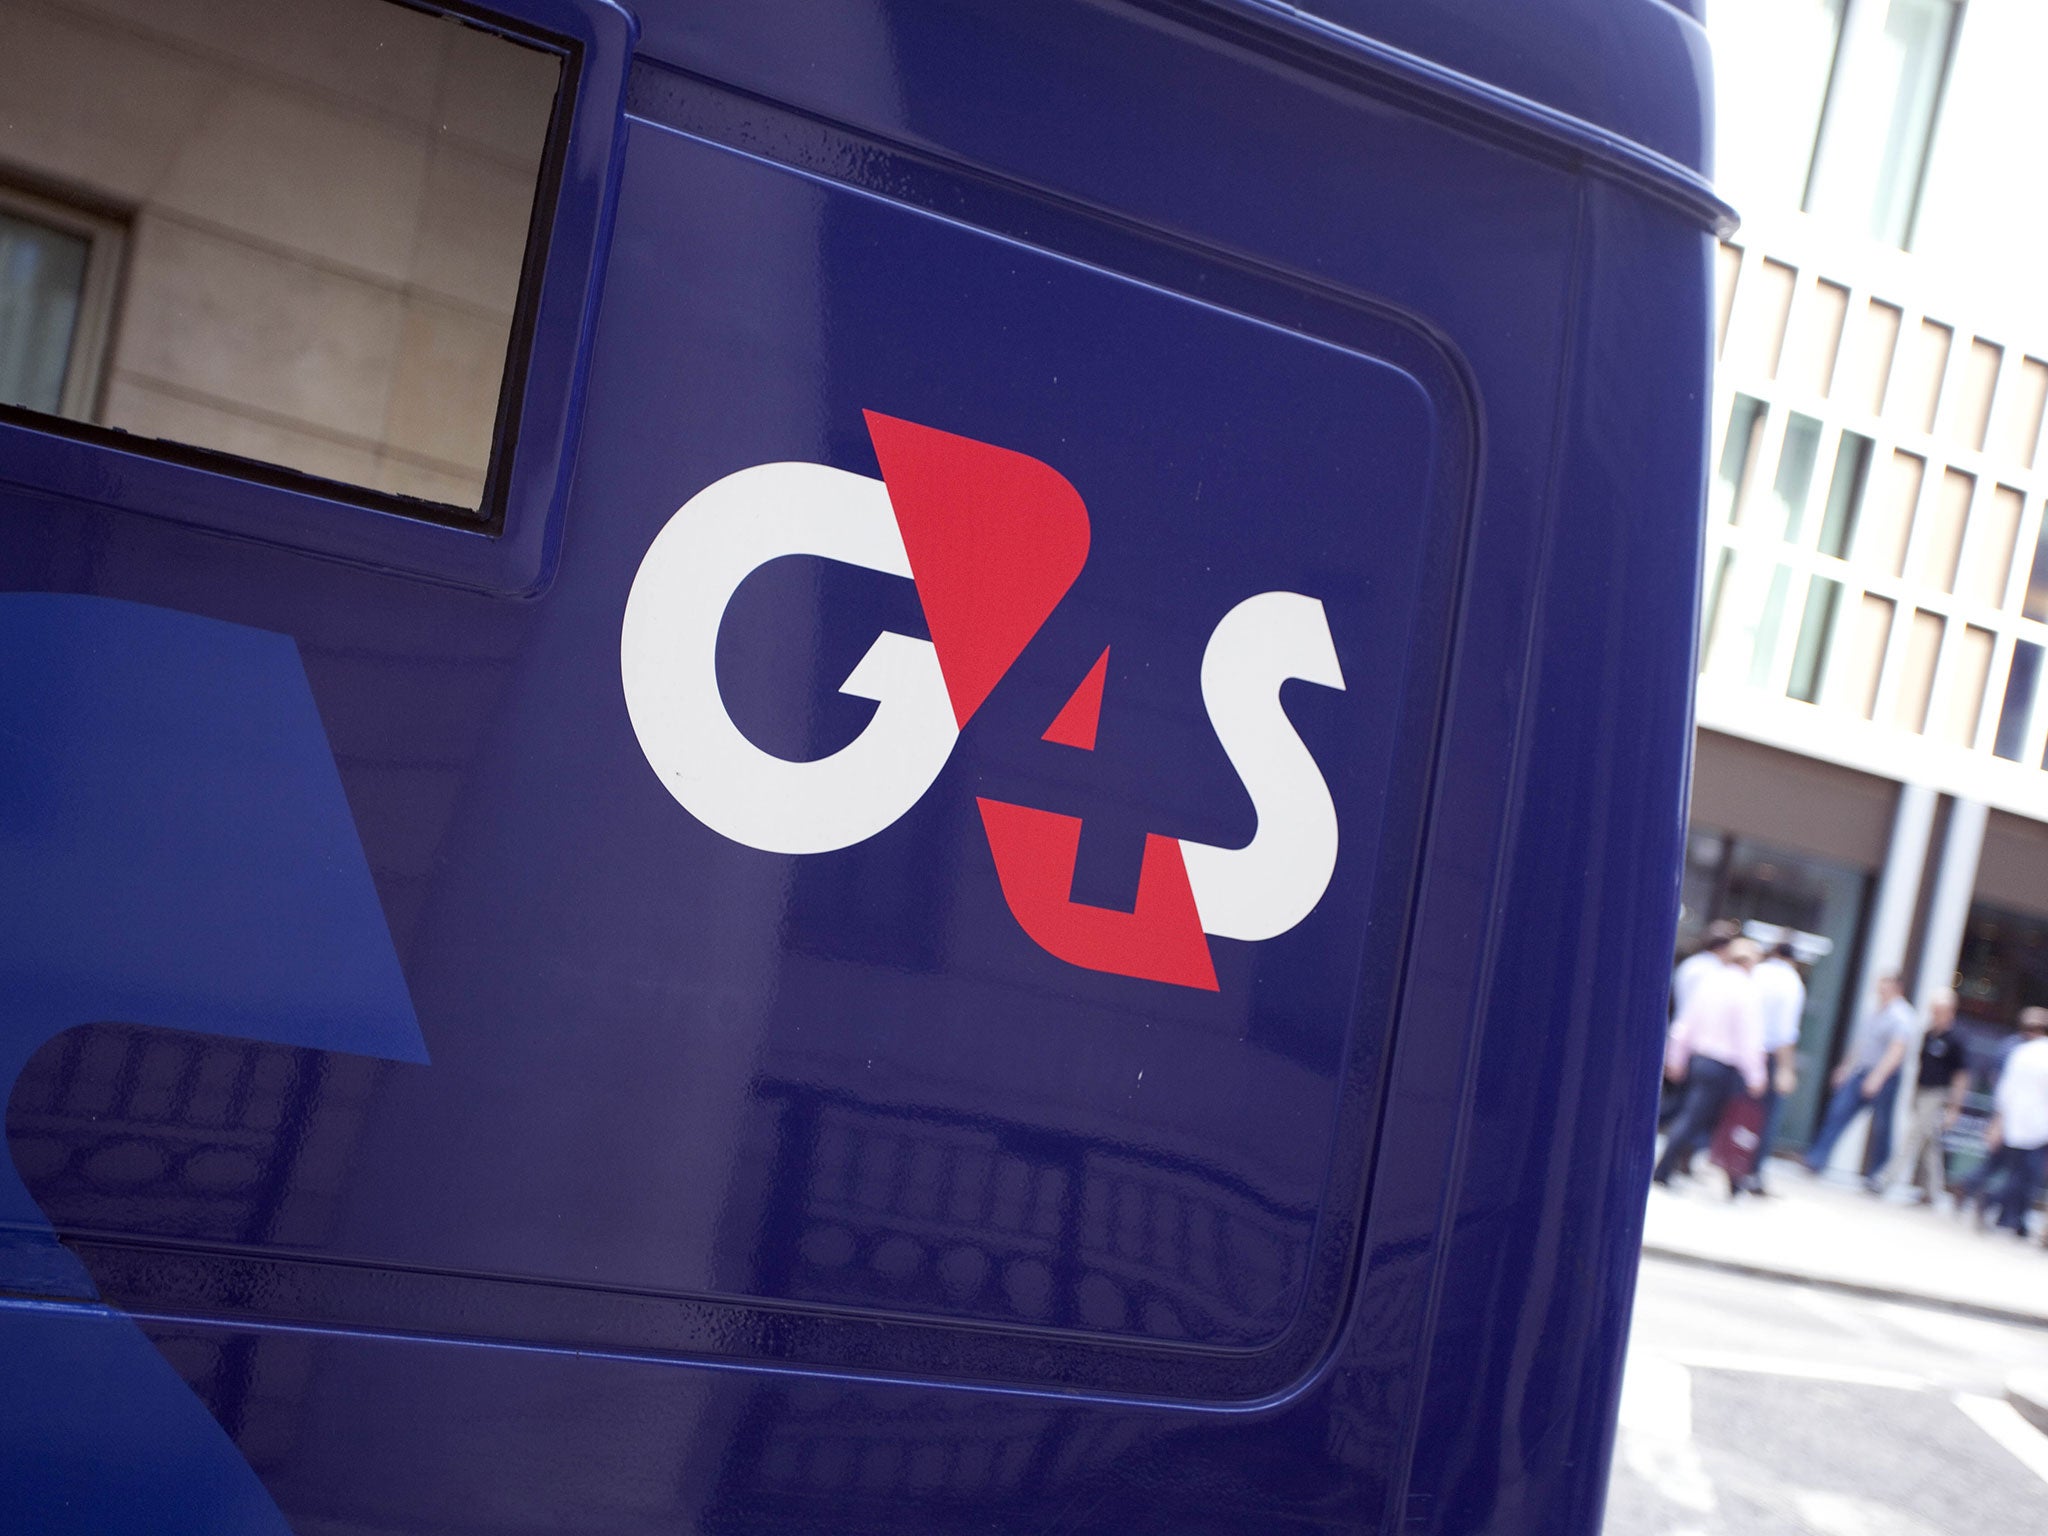 G4S wins an Award at the 9th edition of Global Brands Magazine Awards -  Global Brands Magazine